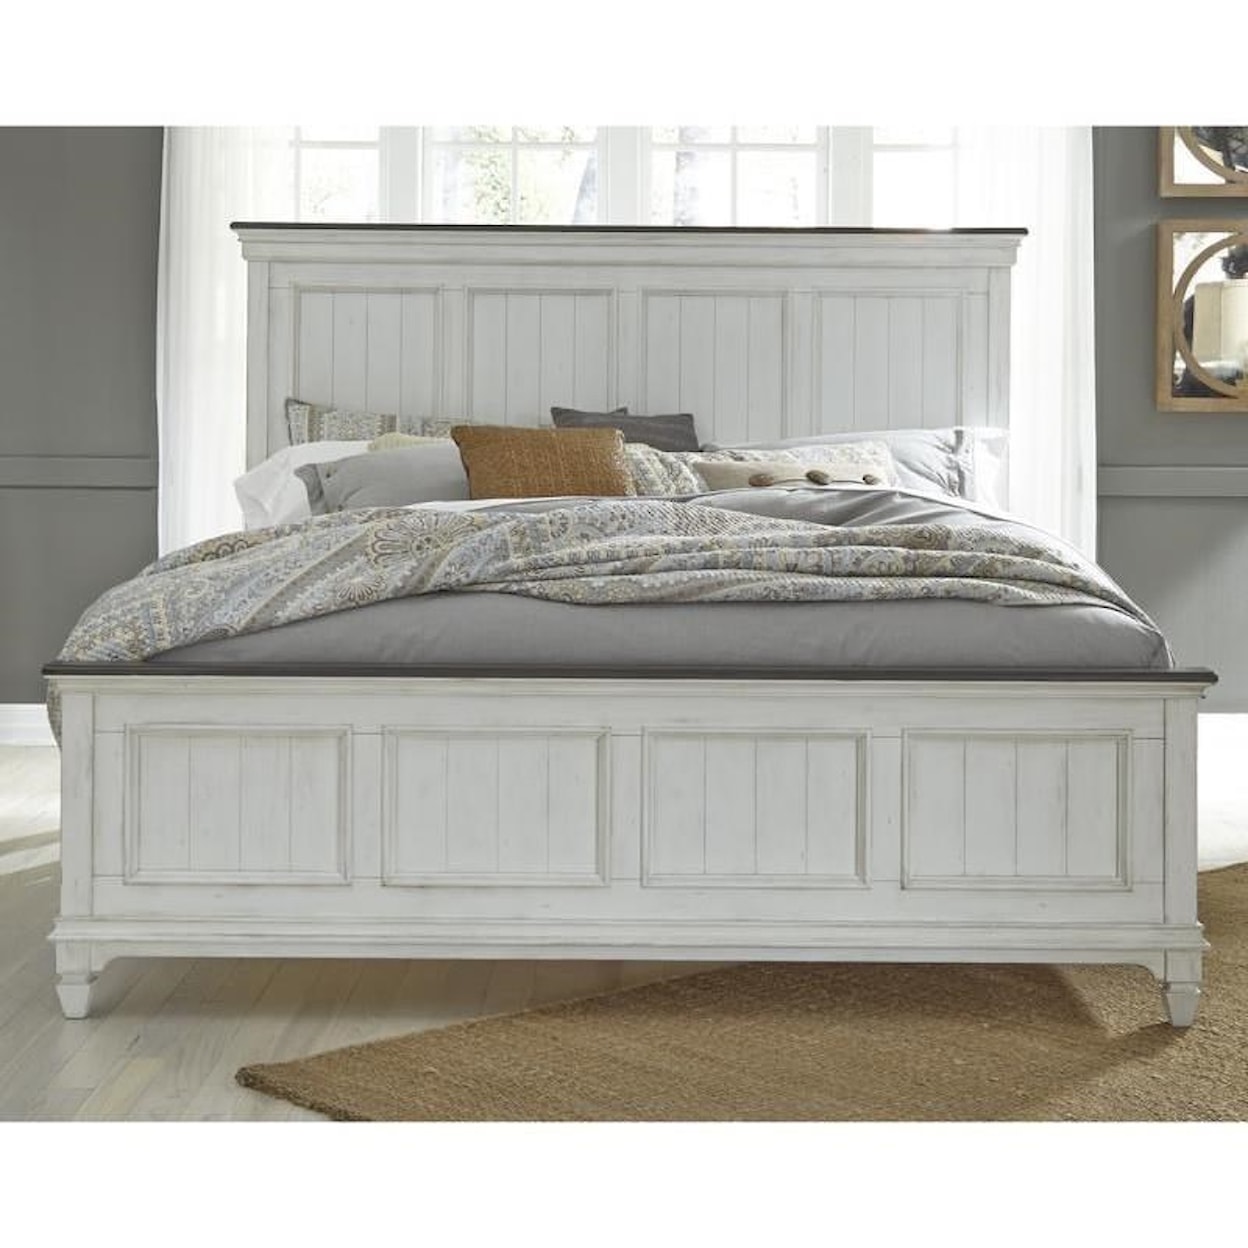 Freedom Furniture Allyson Park Queen Panel Bed